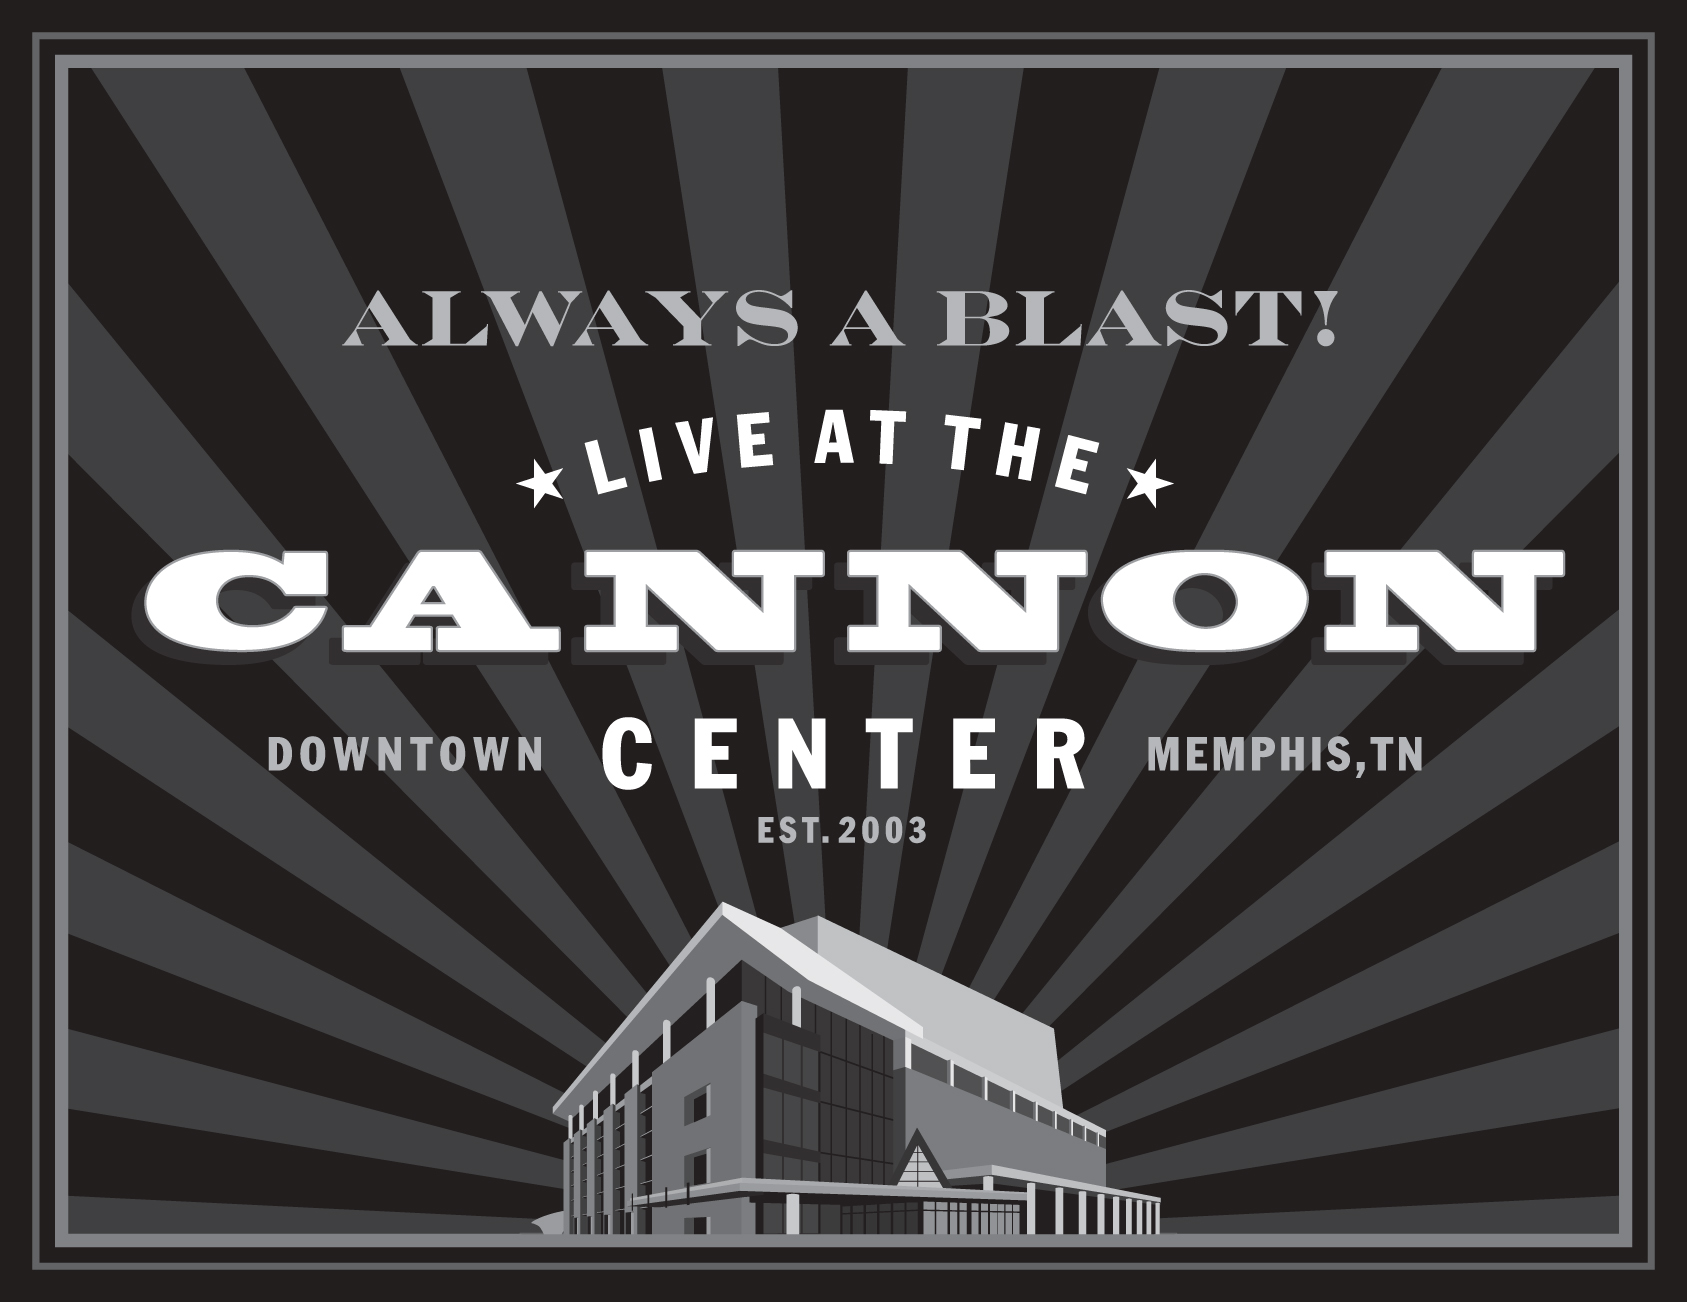  Cannon Center Memphis generic ad and mailer graphic 